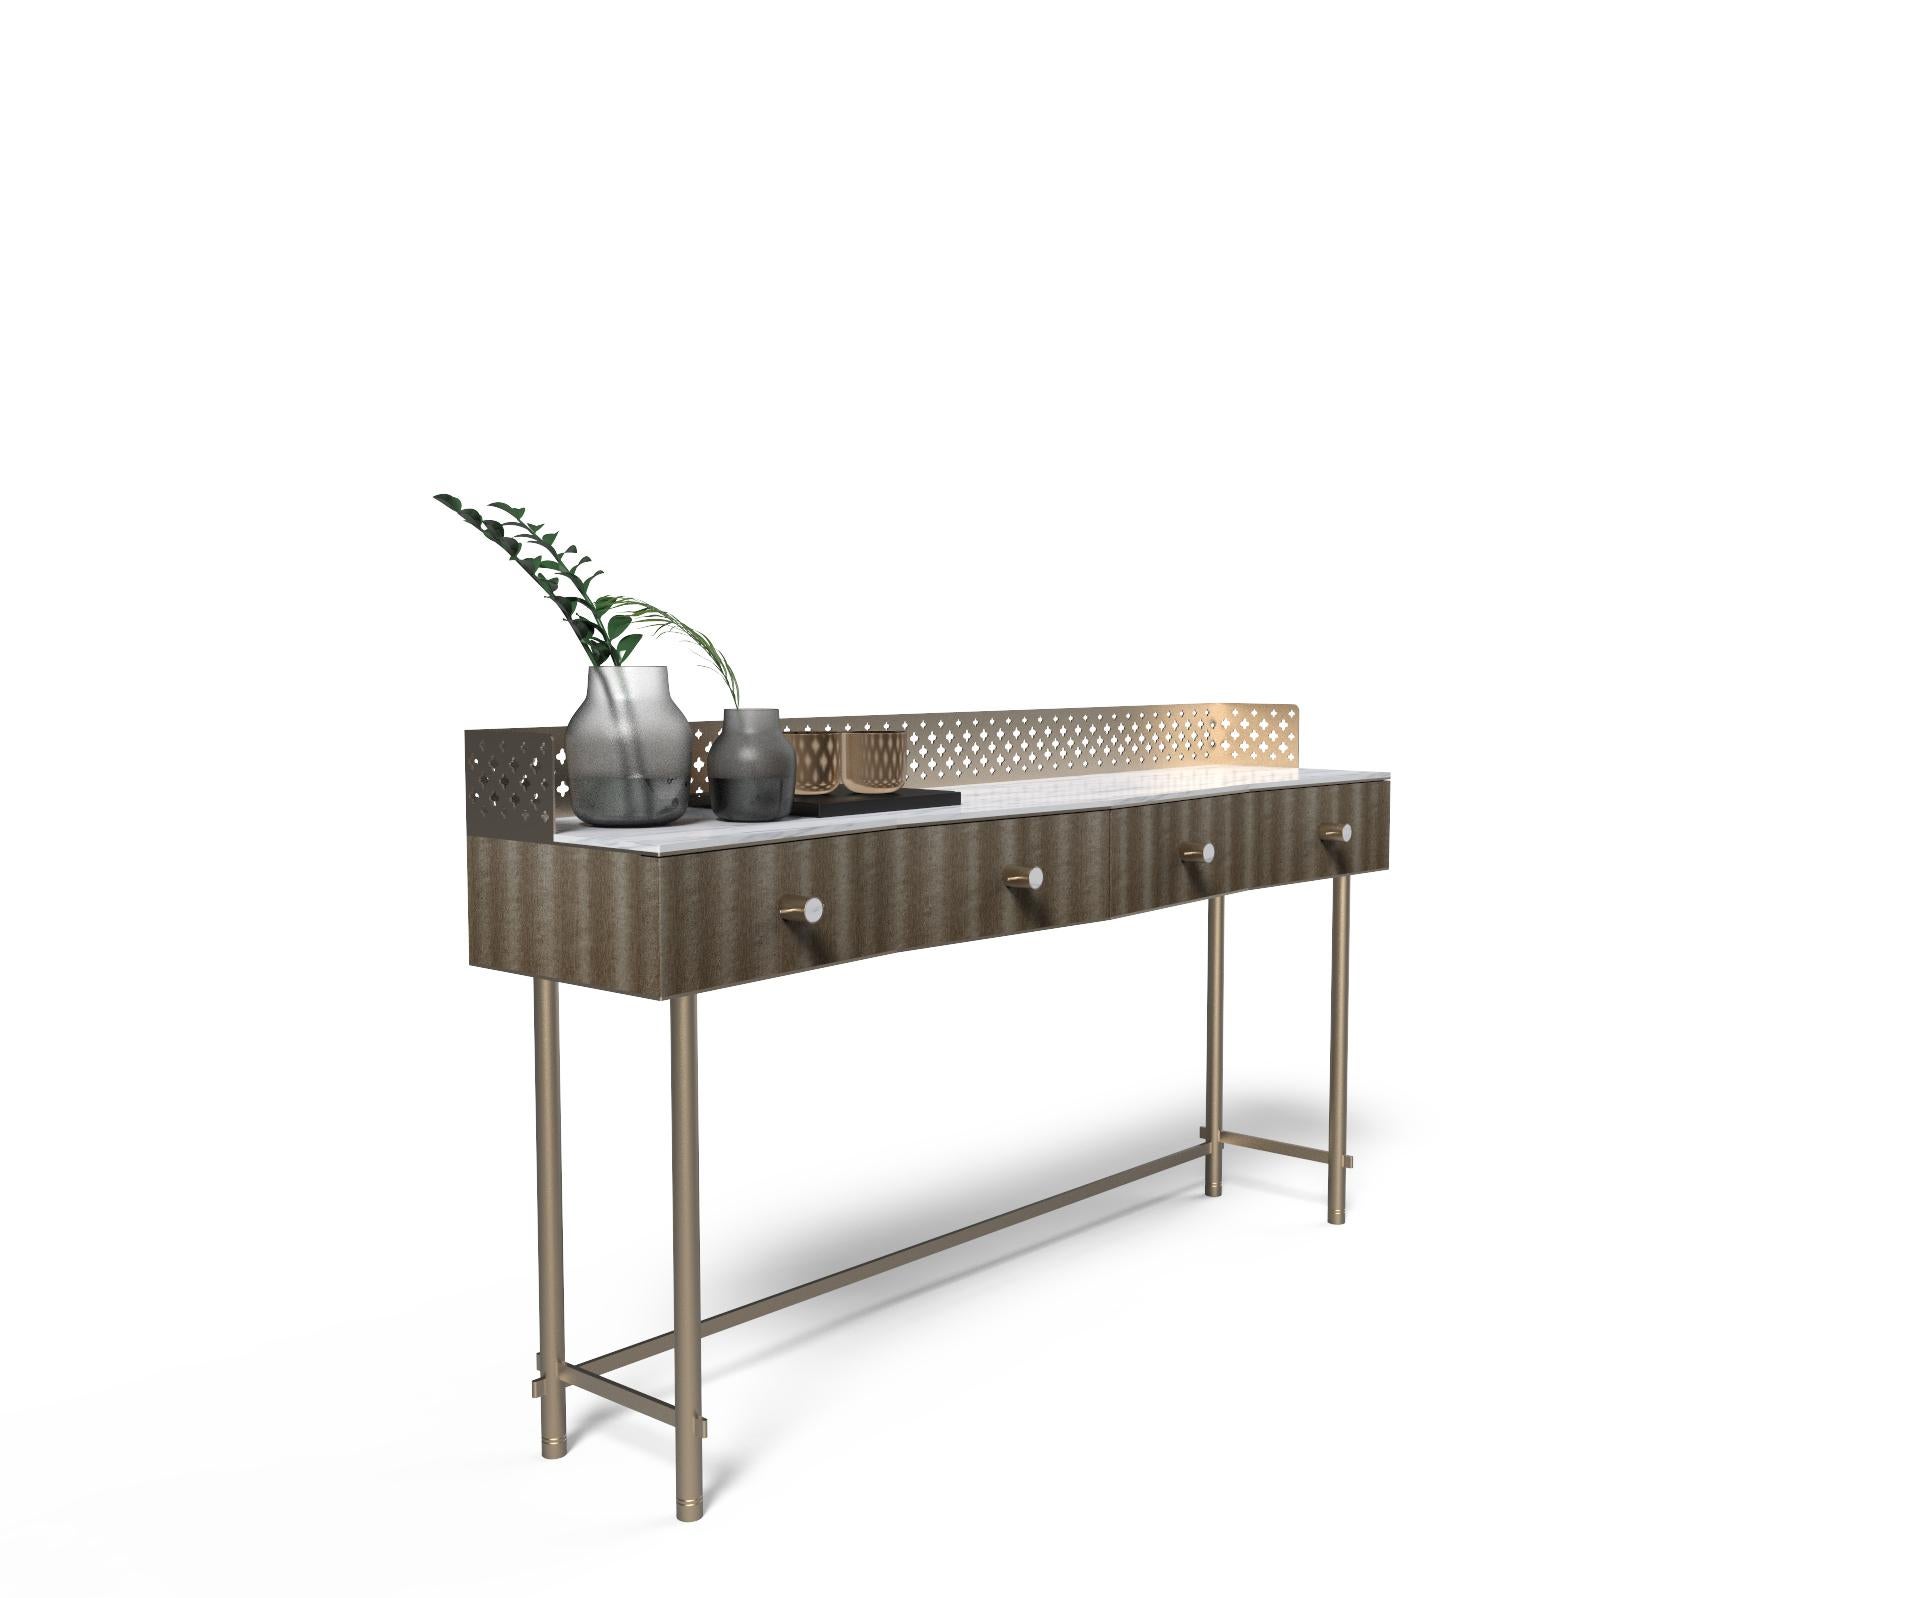 Wooden console table with fabric effect. Two drawers with soft-close slides, precision-calibrated metal handles with wood insert. Laser-cut interlocking tubular structure in metal and laser-cut metal sheet with flower motifs finished manually. Metal